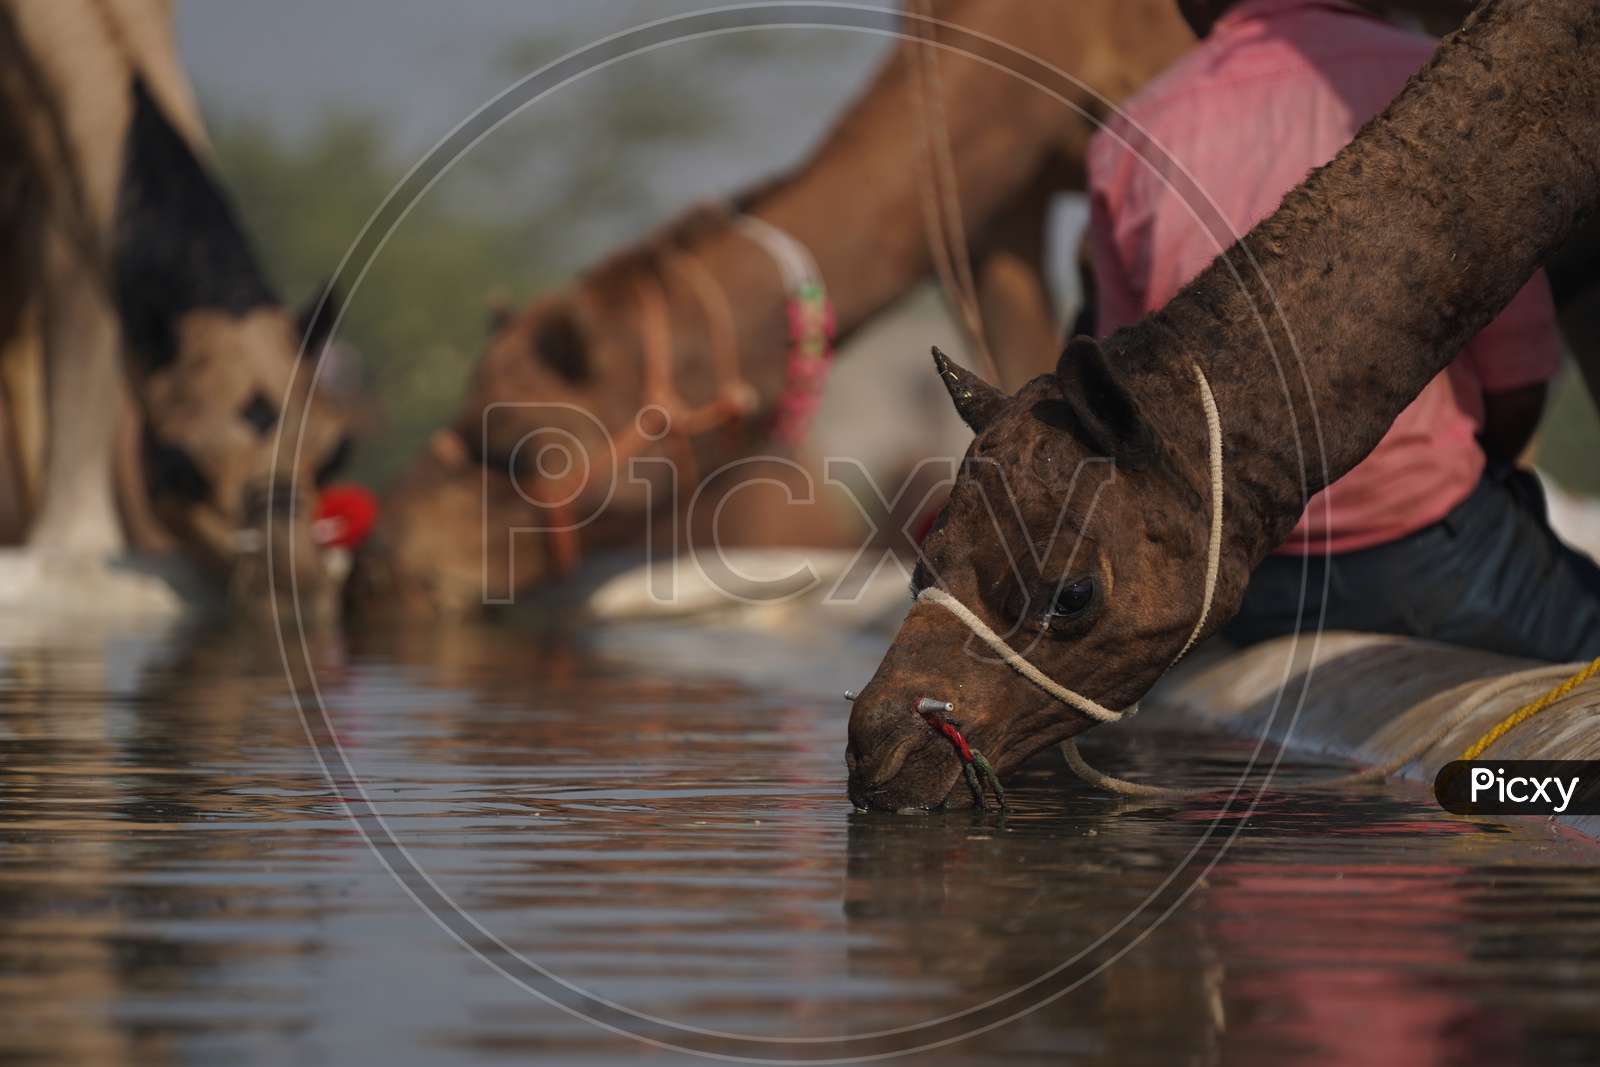 Camels Drinking Water in a Water Tub in Pushkar Camel Fair